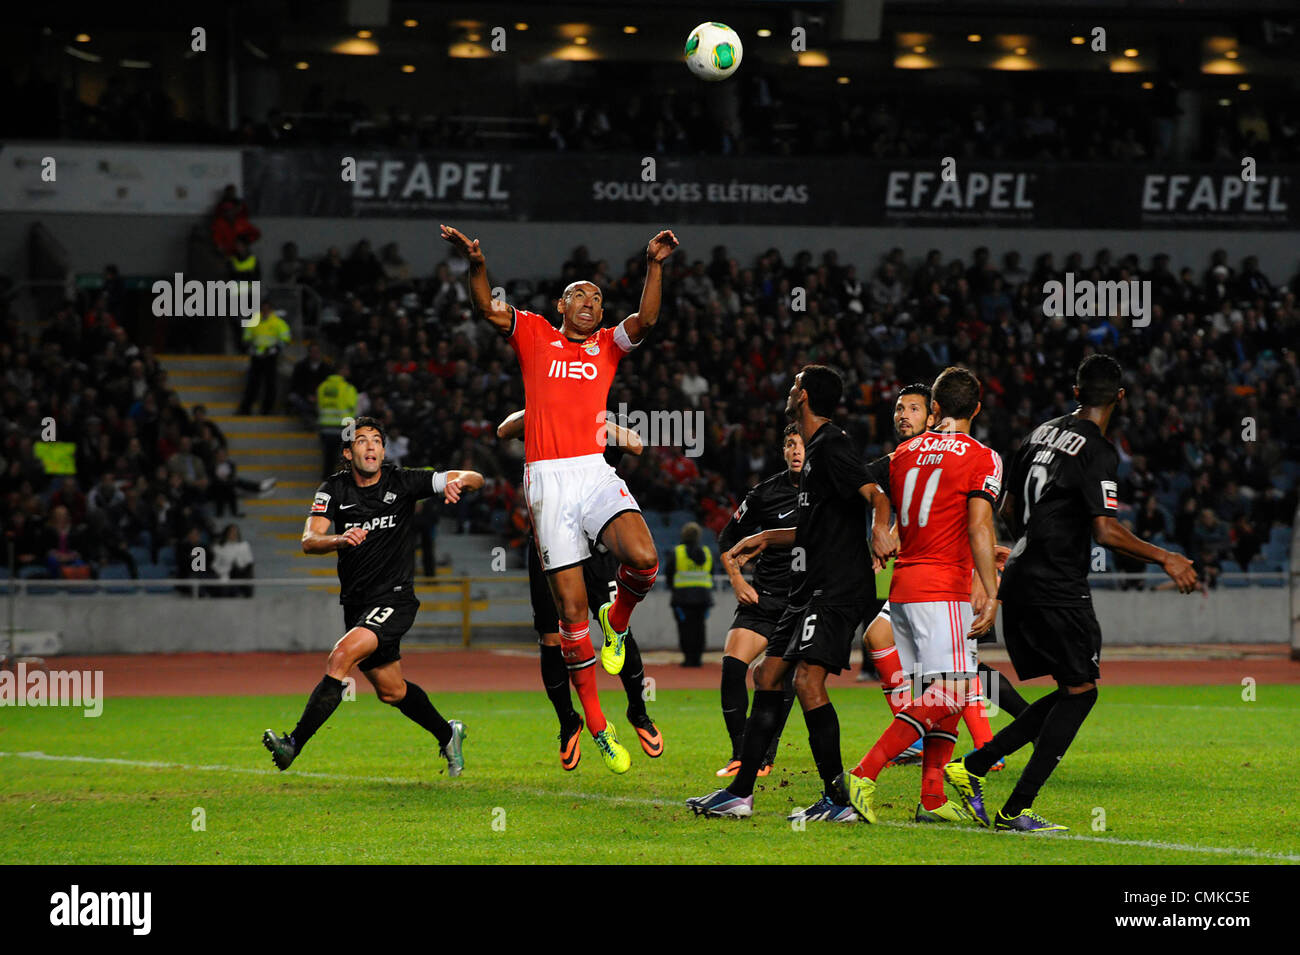 Brazilian defender Luisão of Benfica vies for the ball with Academica defenders during the portuguese Liga Sagres football match between Academica and Benfica Stock Photo